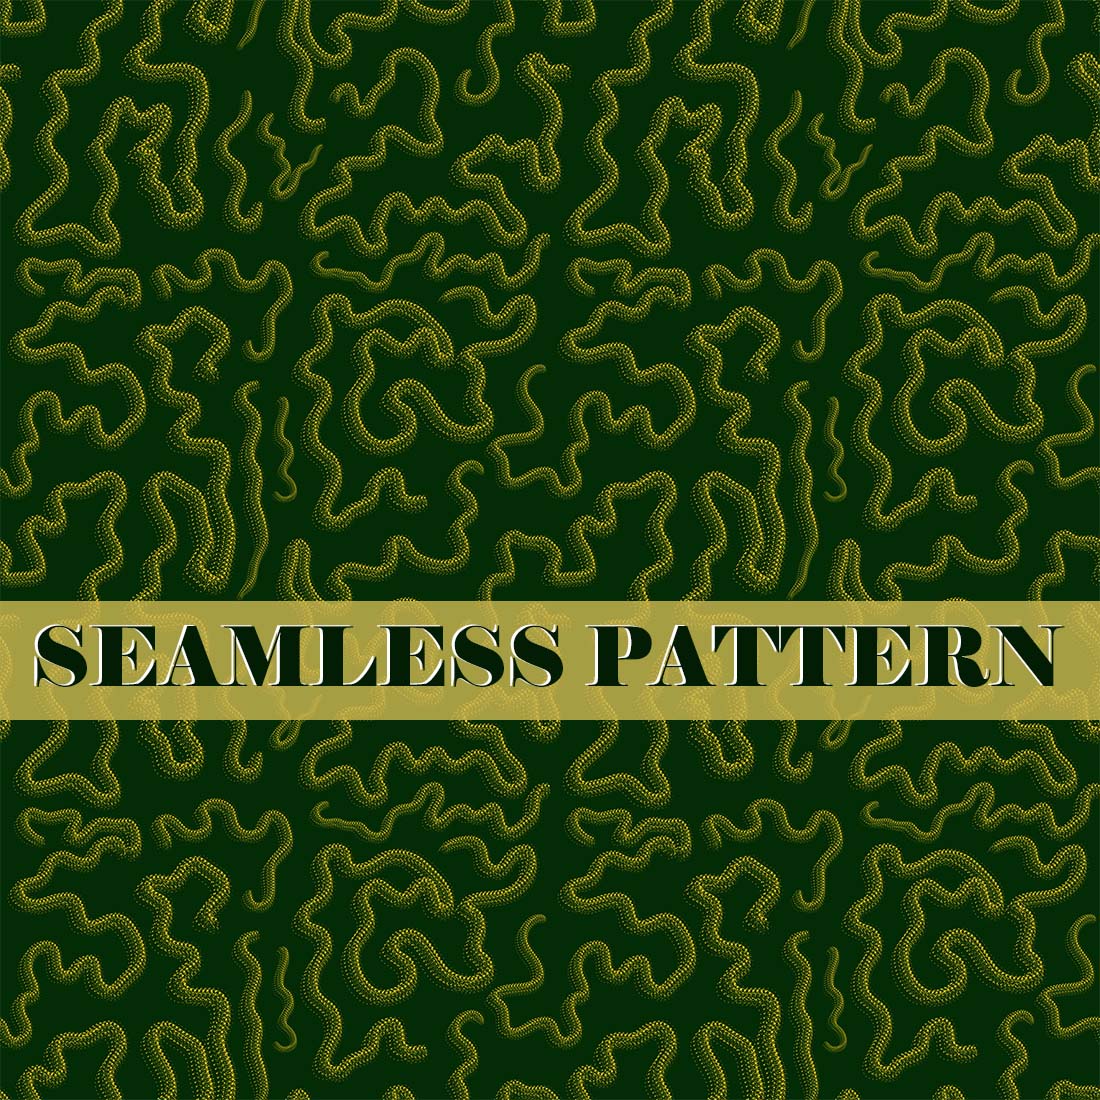 Seamless pattern; retro pattern; wallpaper; gift wrapping paper etc cover image.